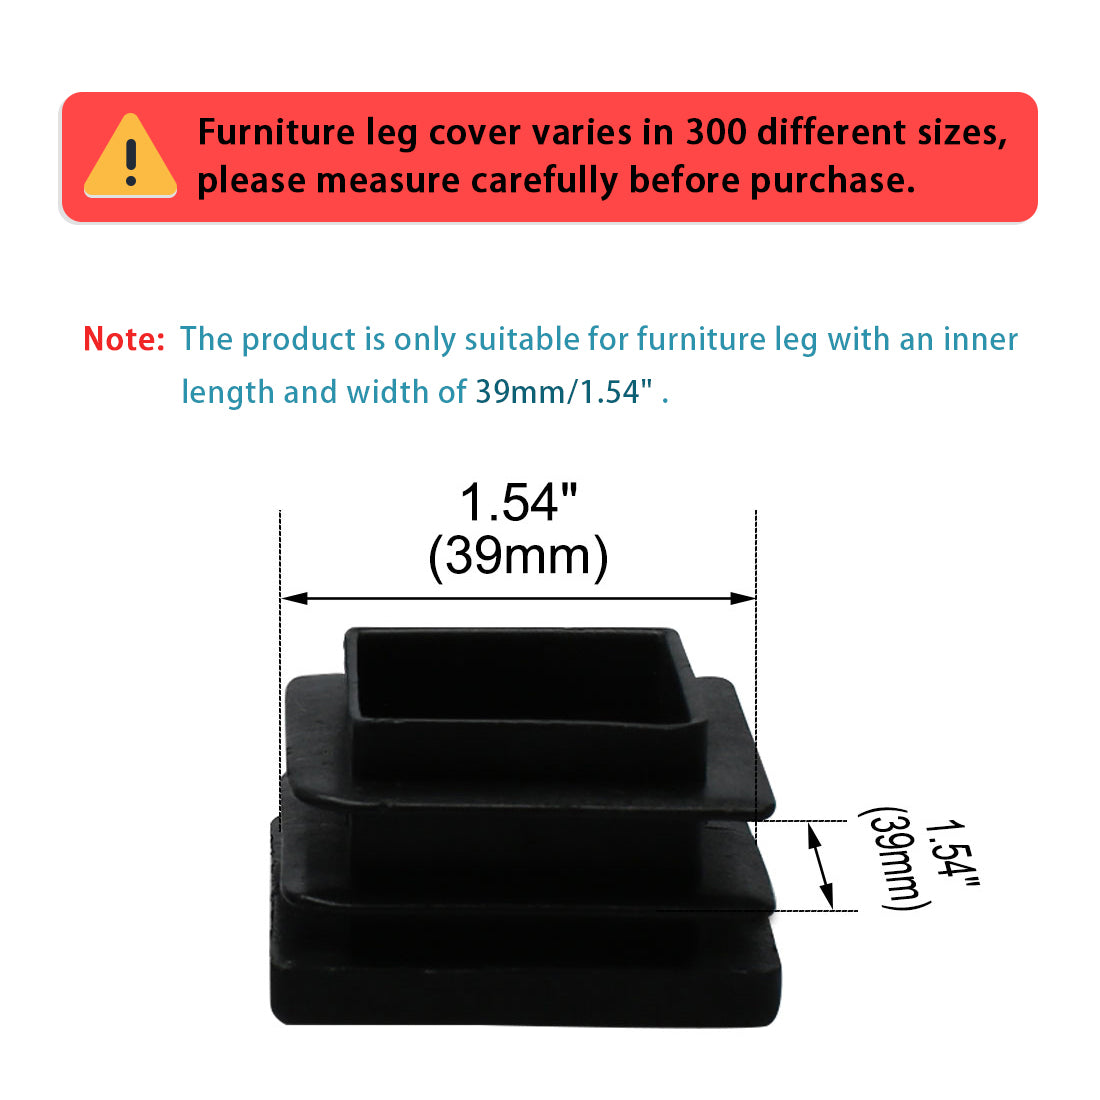 Uxcell Uxcell Square Tube Insert Furniture Floor Protector for 0.87" to 0.94" Inner Size 19pcs